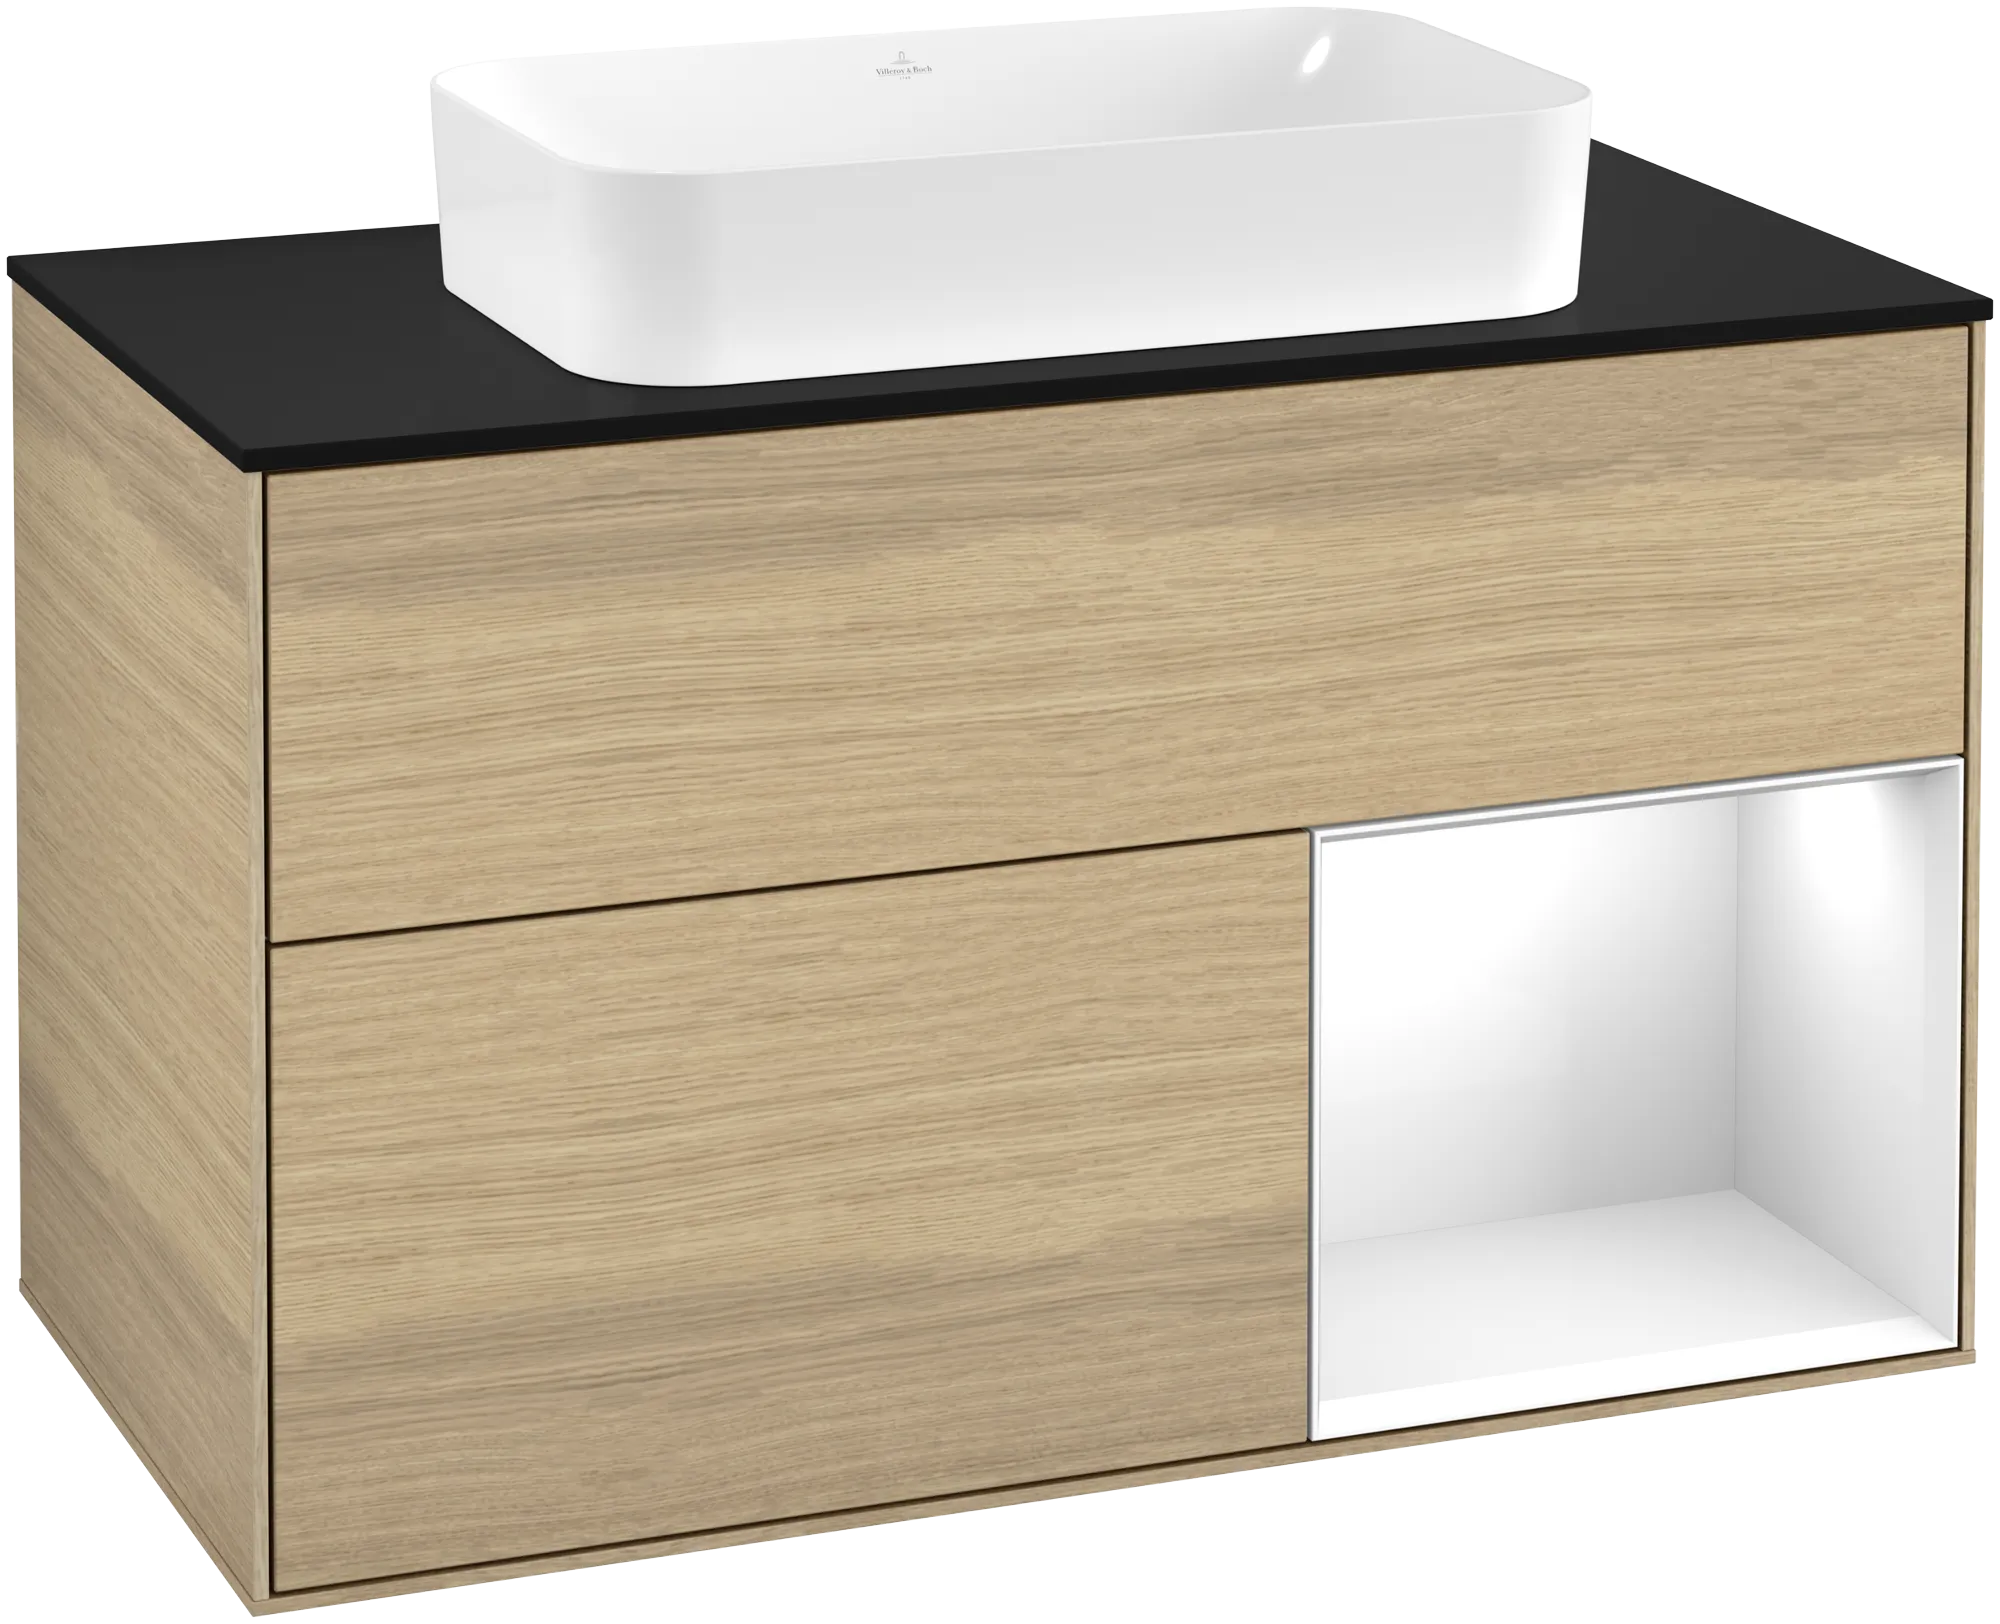 VILLEROY BOCH Finion Vanity unit, with lighting, 2 pull-out compartments, 1000 x 603 x 501 mm, Oak Veneer / Glossy White Lacquer / Glass Black Matt #G252GFPC resmi